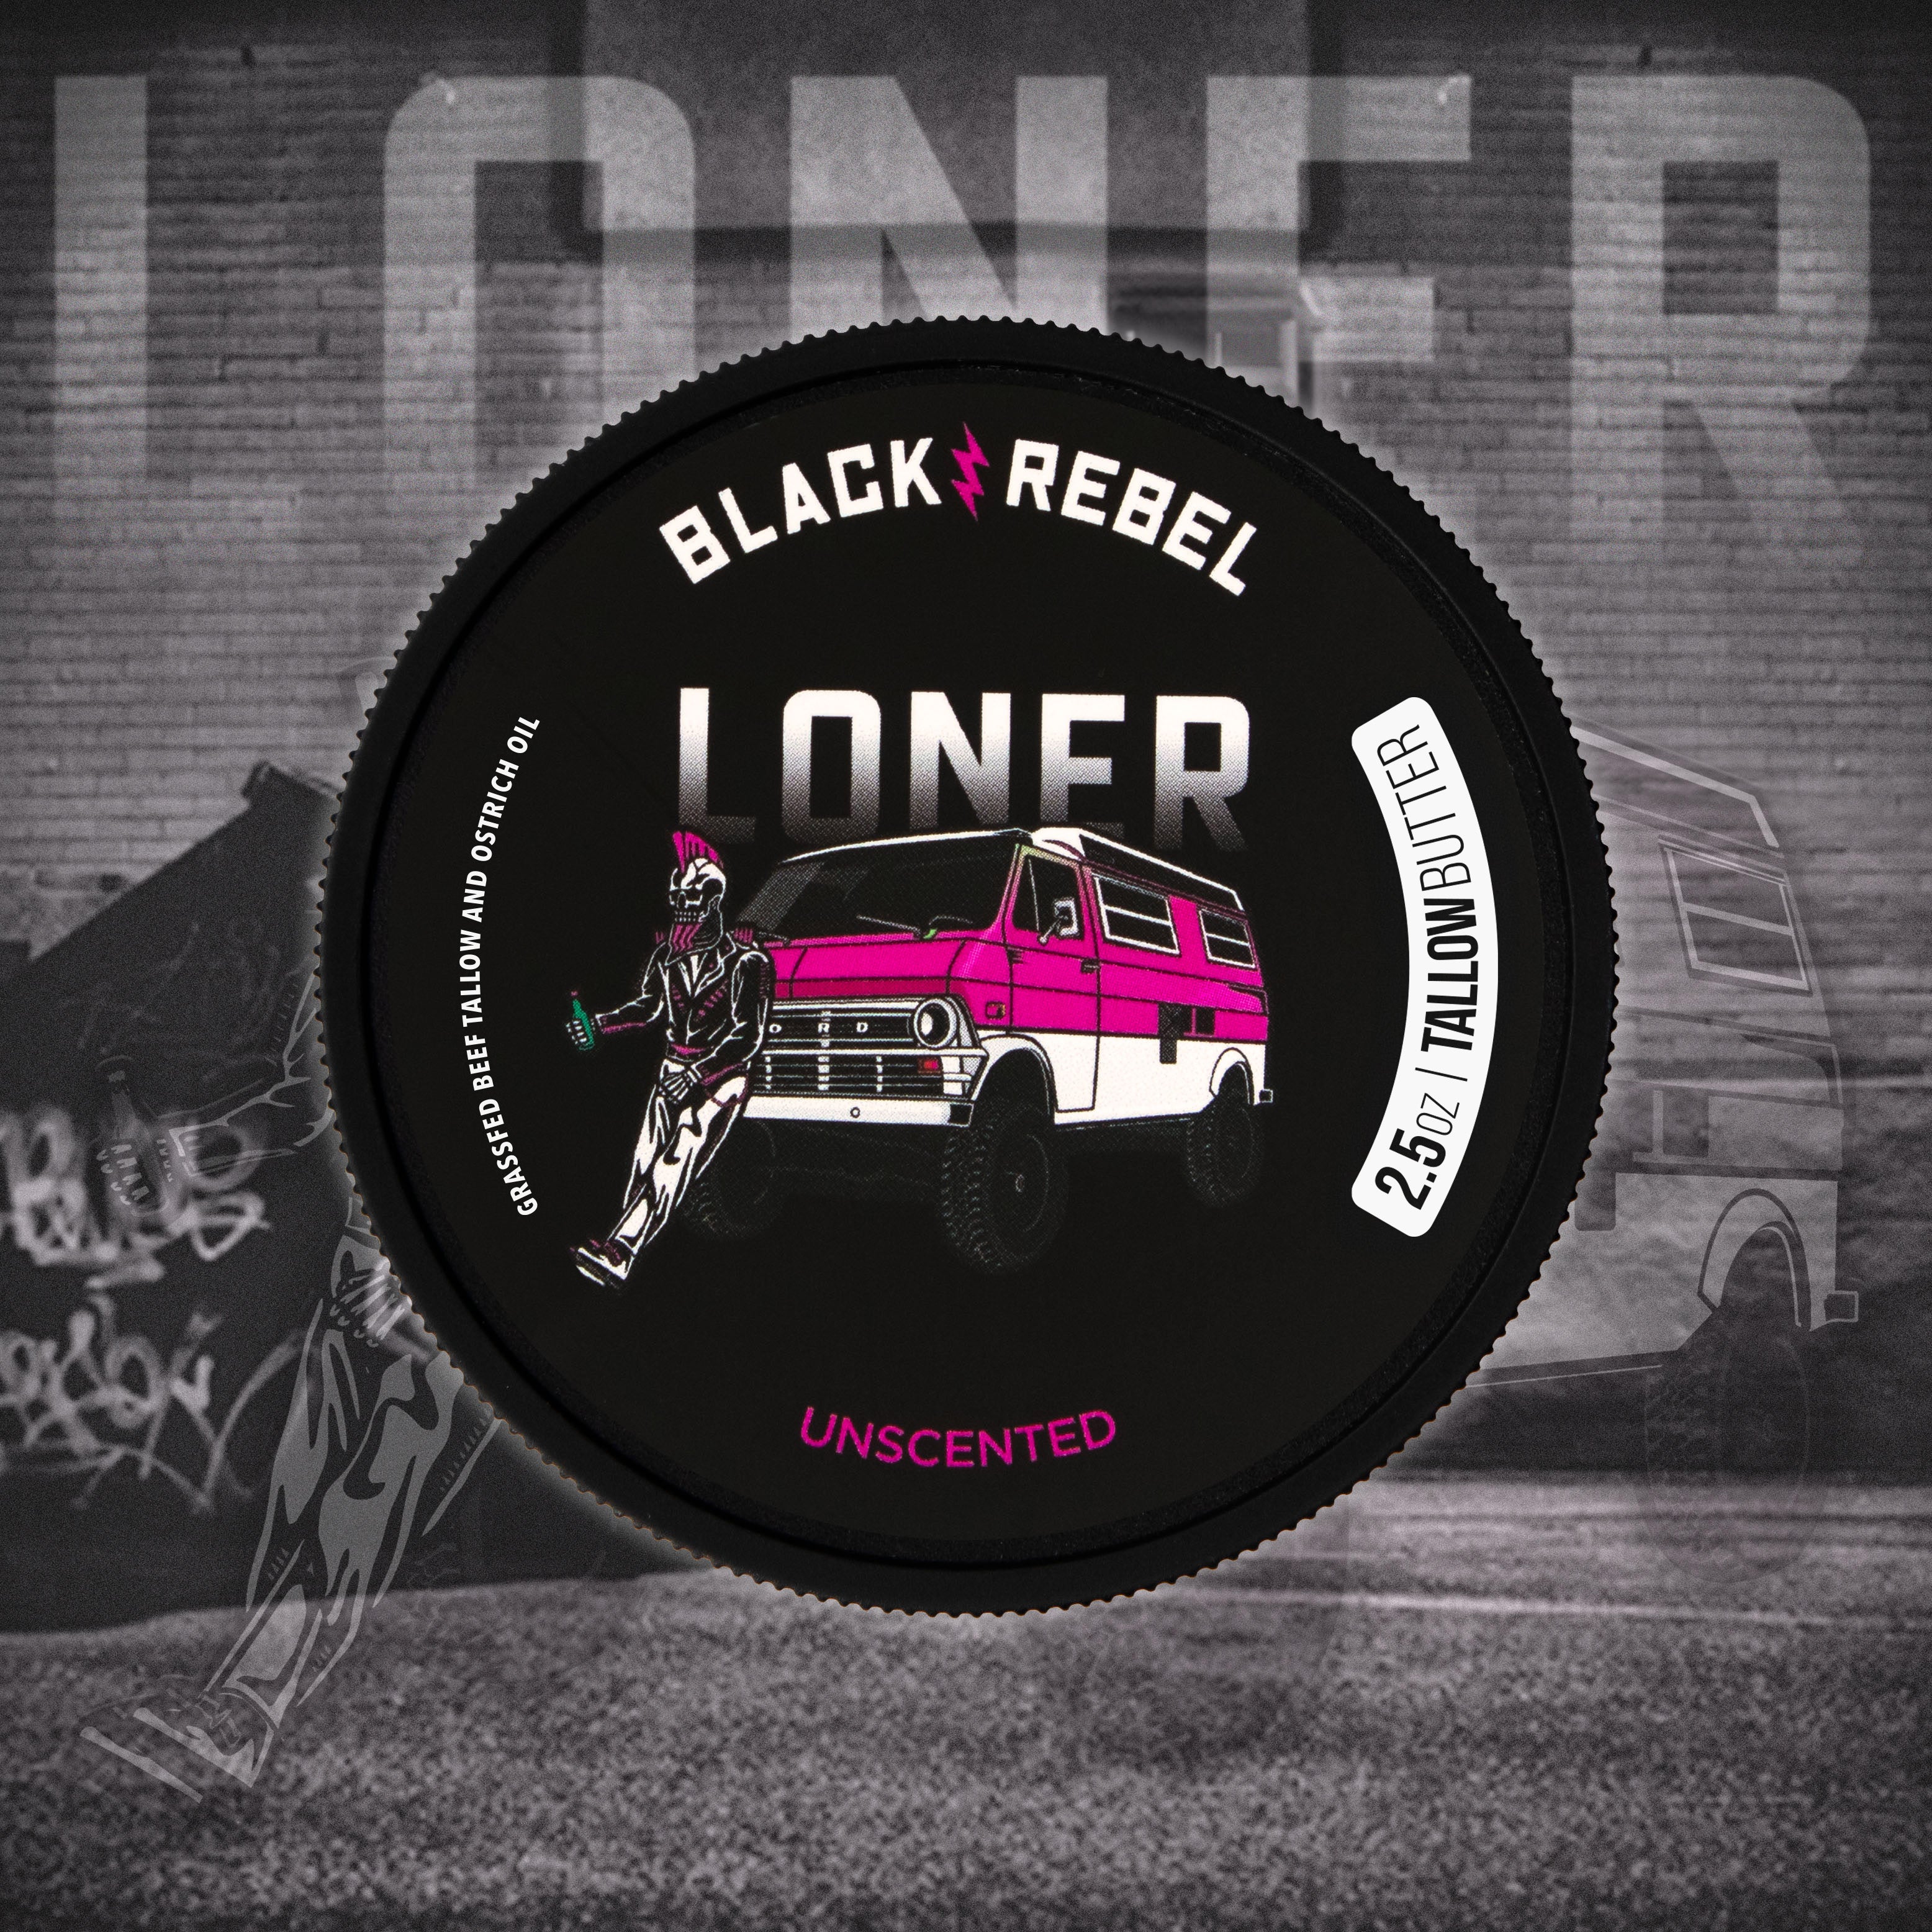 THE LONER (unscented)